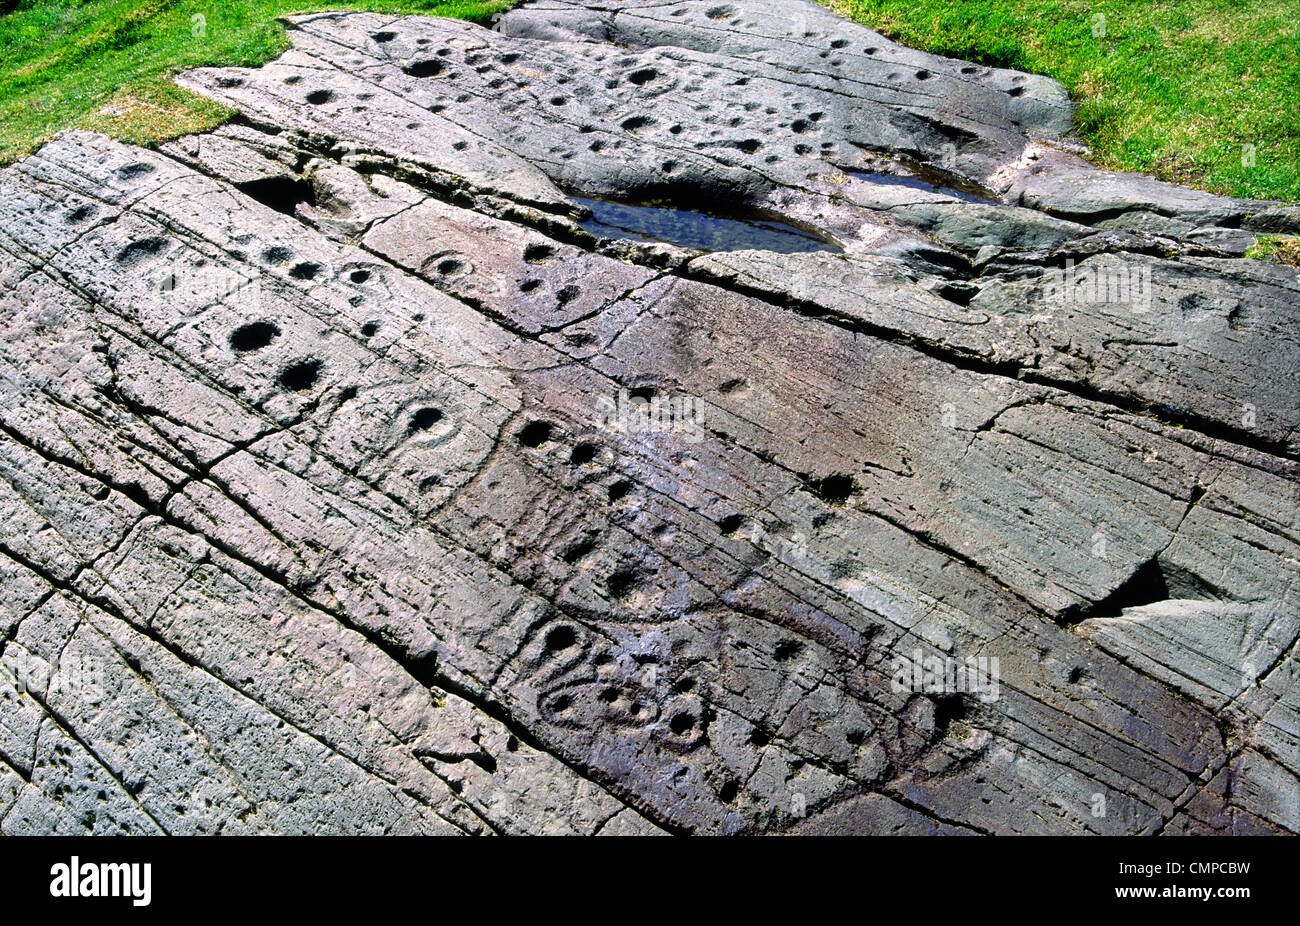 Prehistoric cup and ring mark carved stone rock art outcrop at Kilmichael Glassary, Kilmartin Valley, Argyll, west Scotland, UK Stock Photo